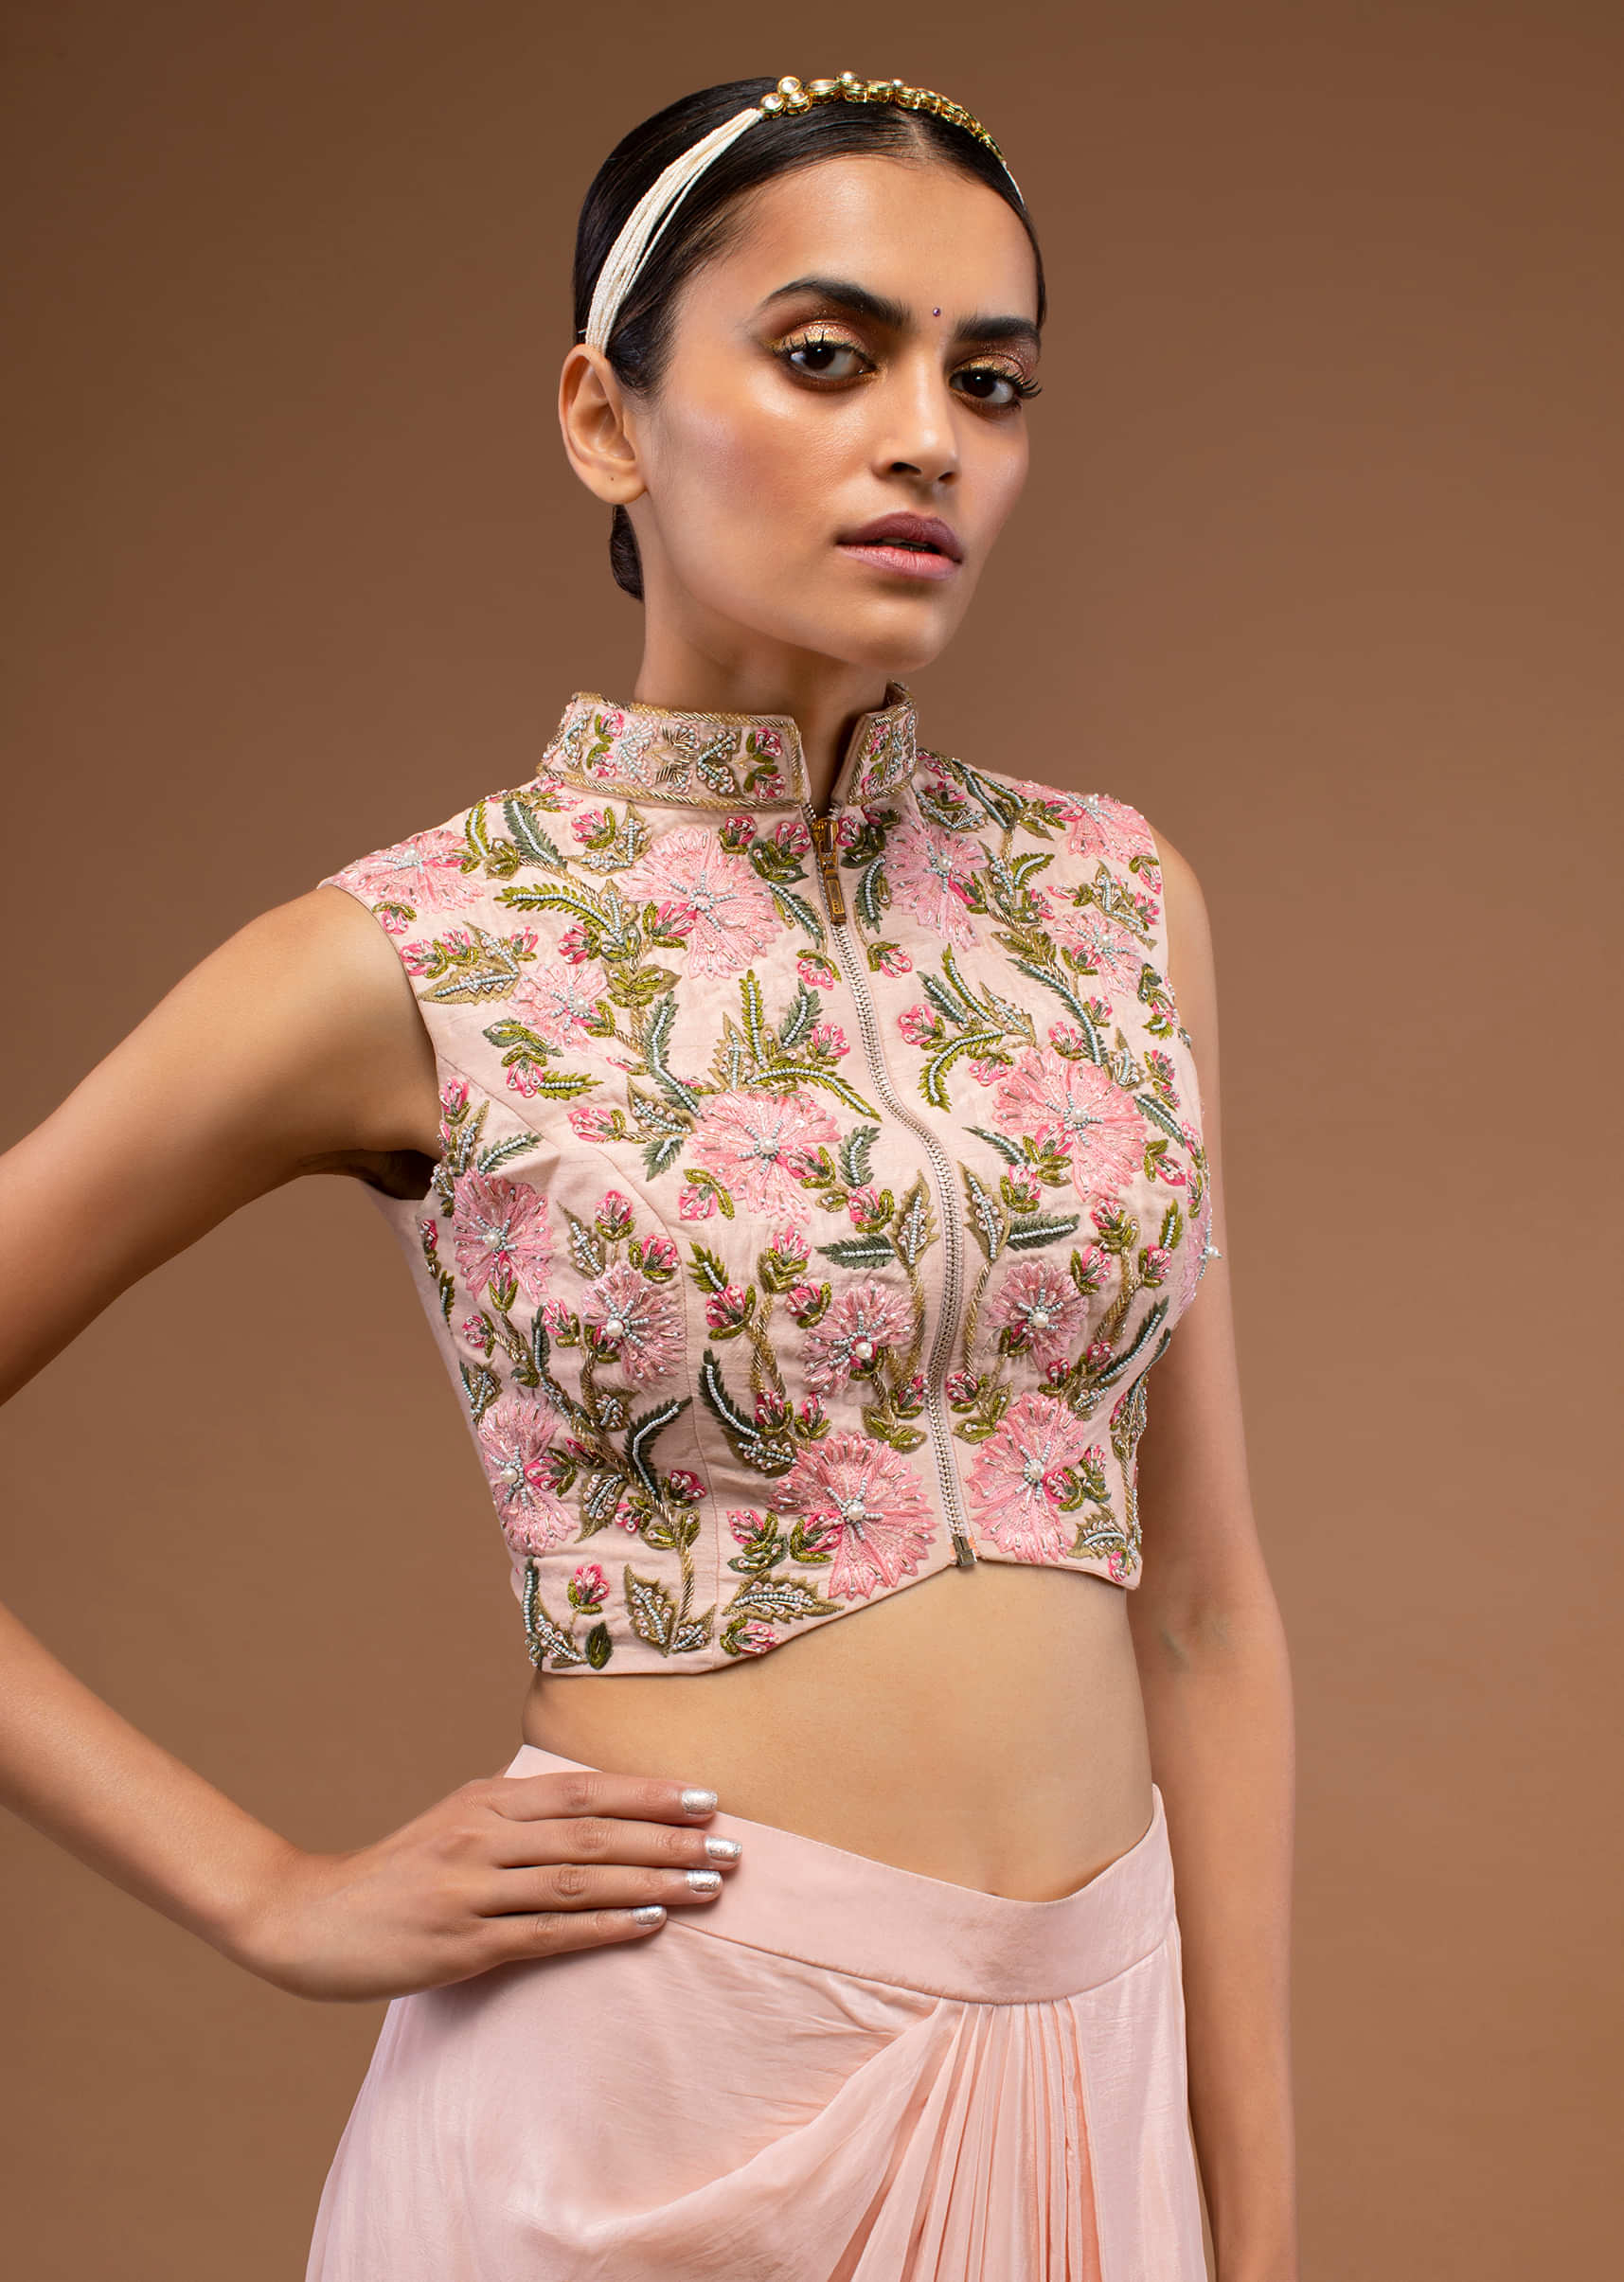 Peach Blush Dhoti Skirt And Crop Top Set In Floral Embroidery, Crafted In Organza With A Side Zip And Hooks Closure